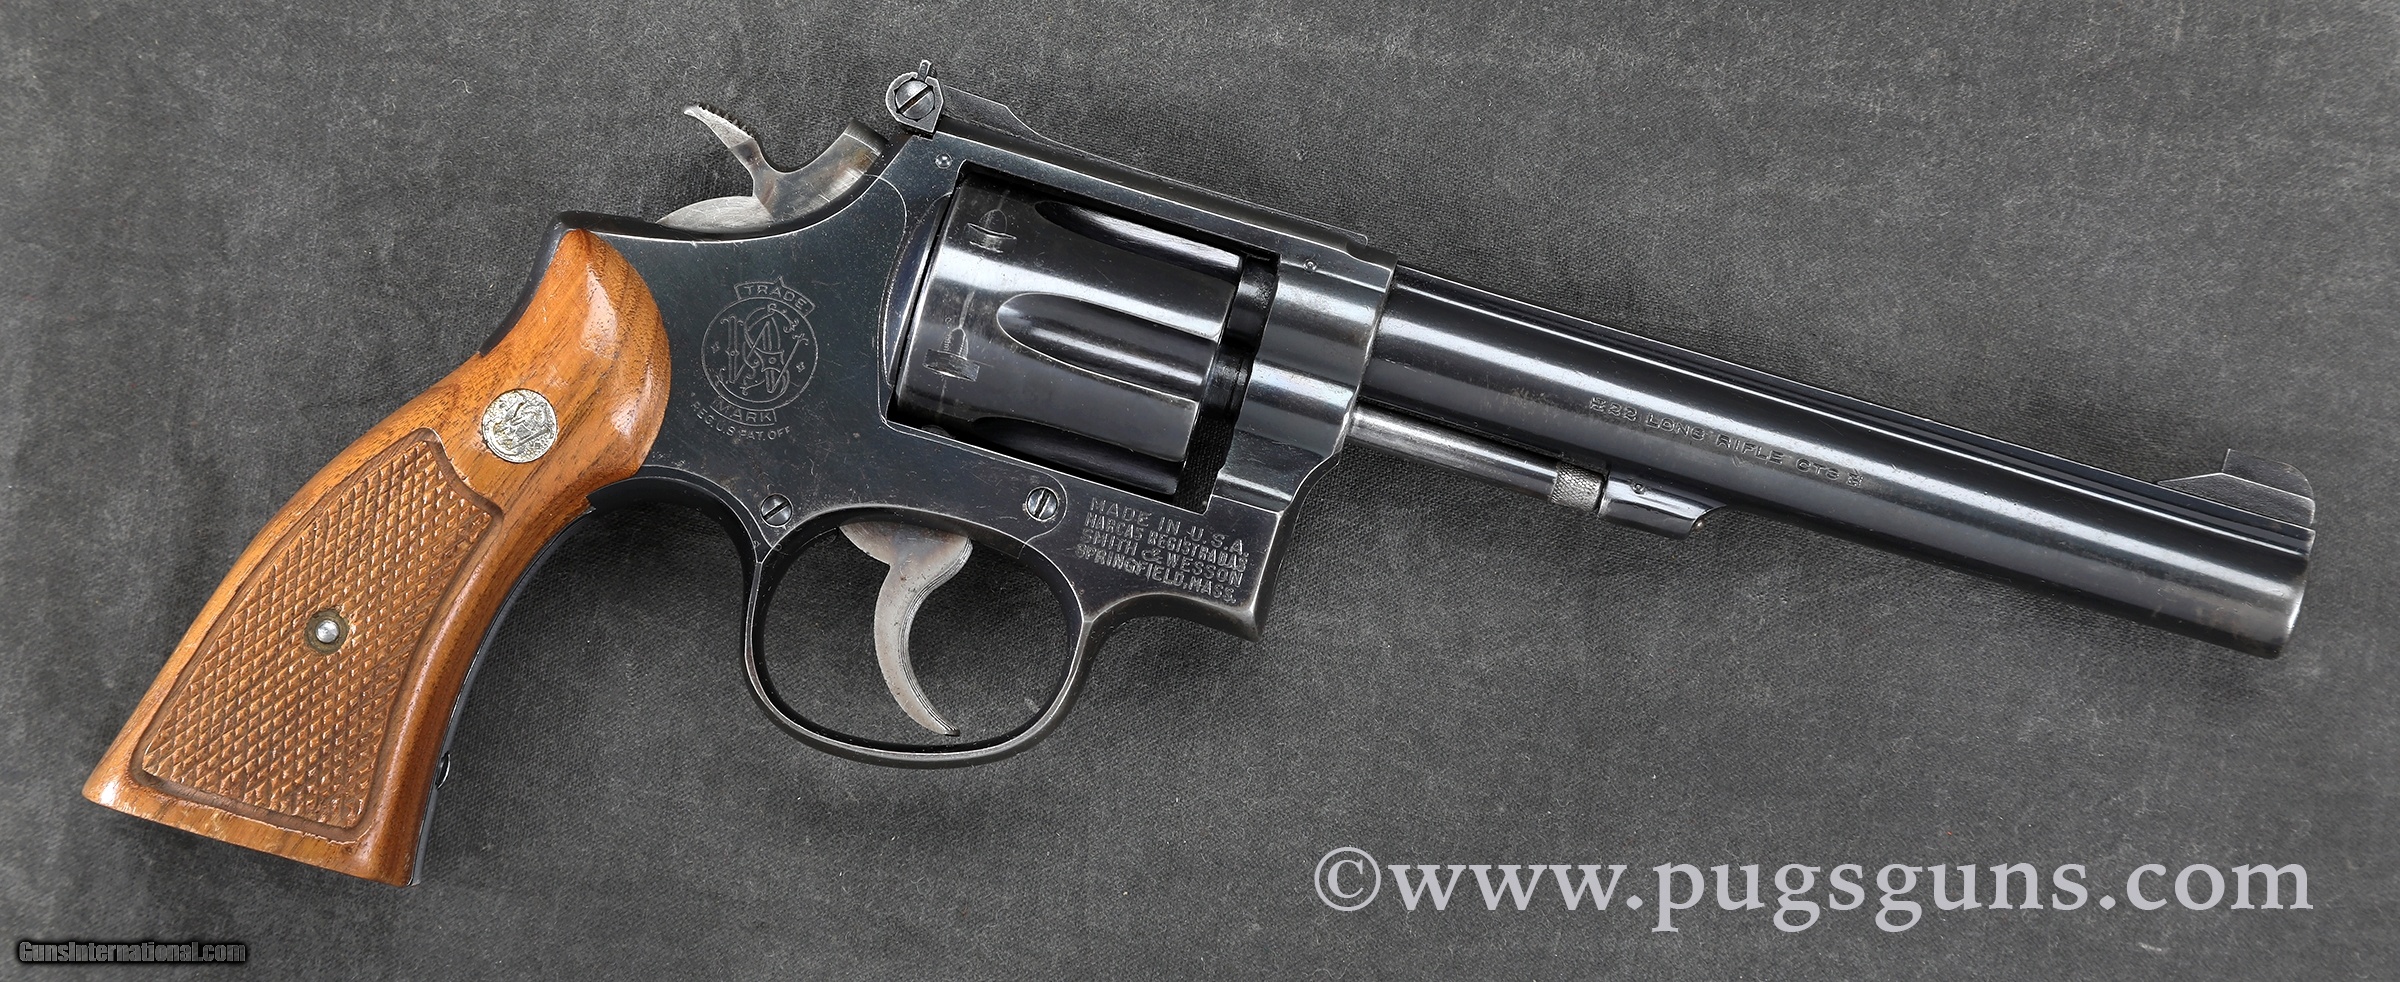 Smith And Wesson 17